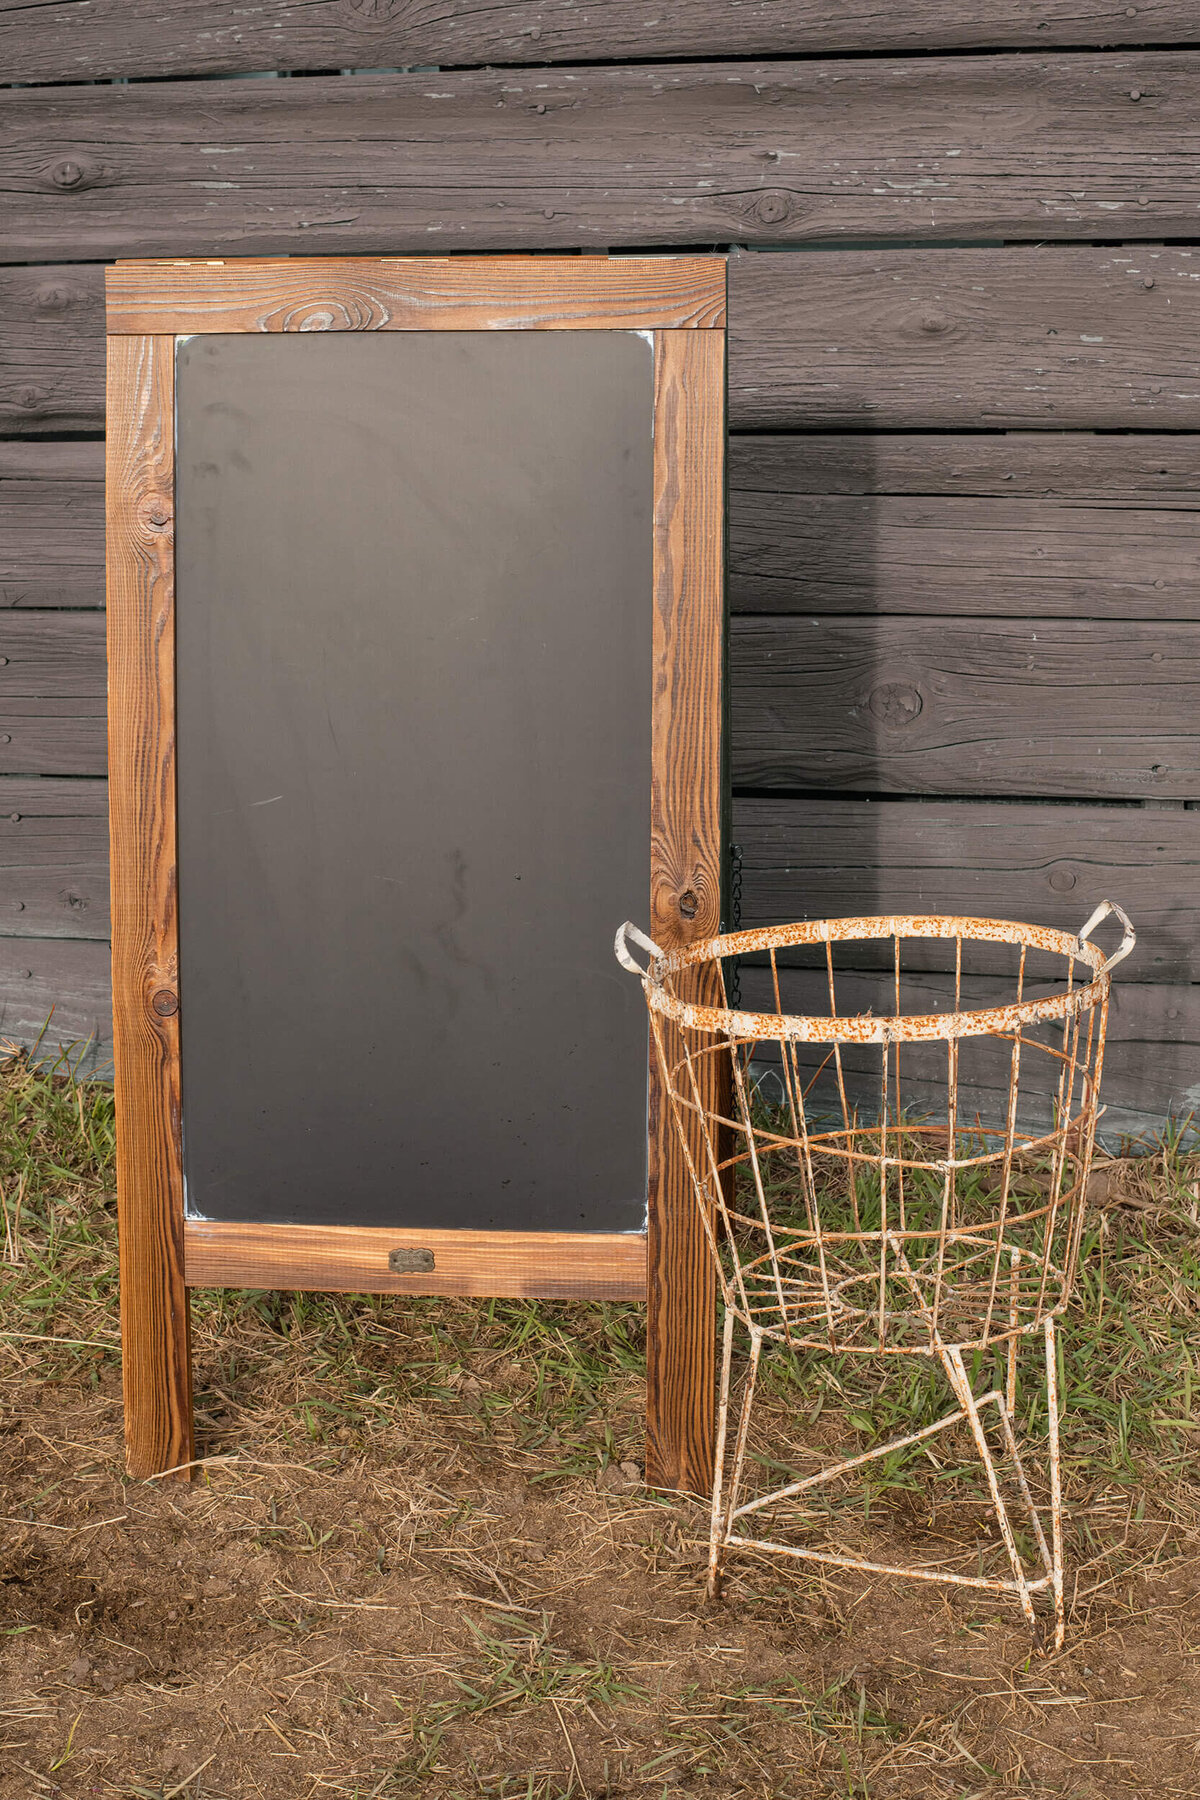 wood chalkboard sign and wire basket